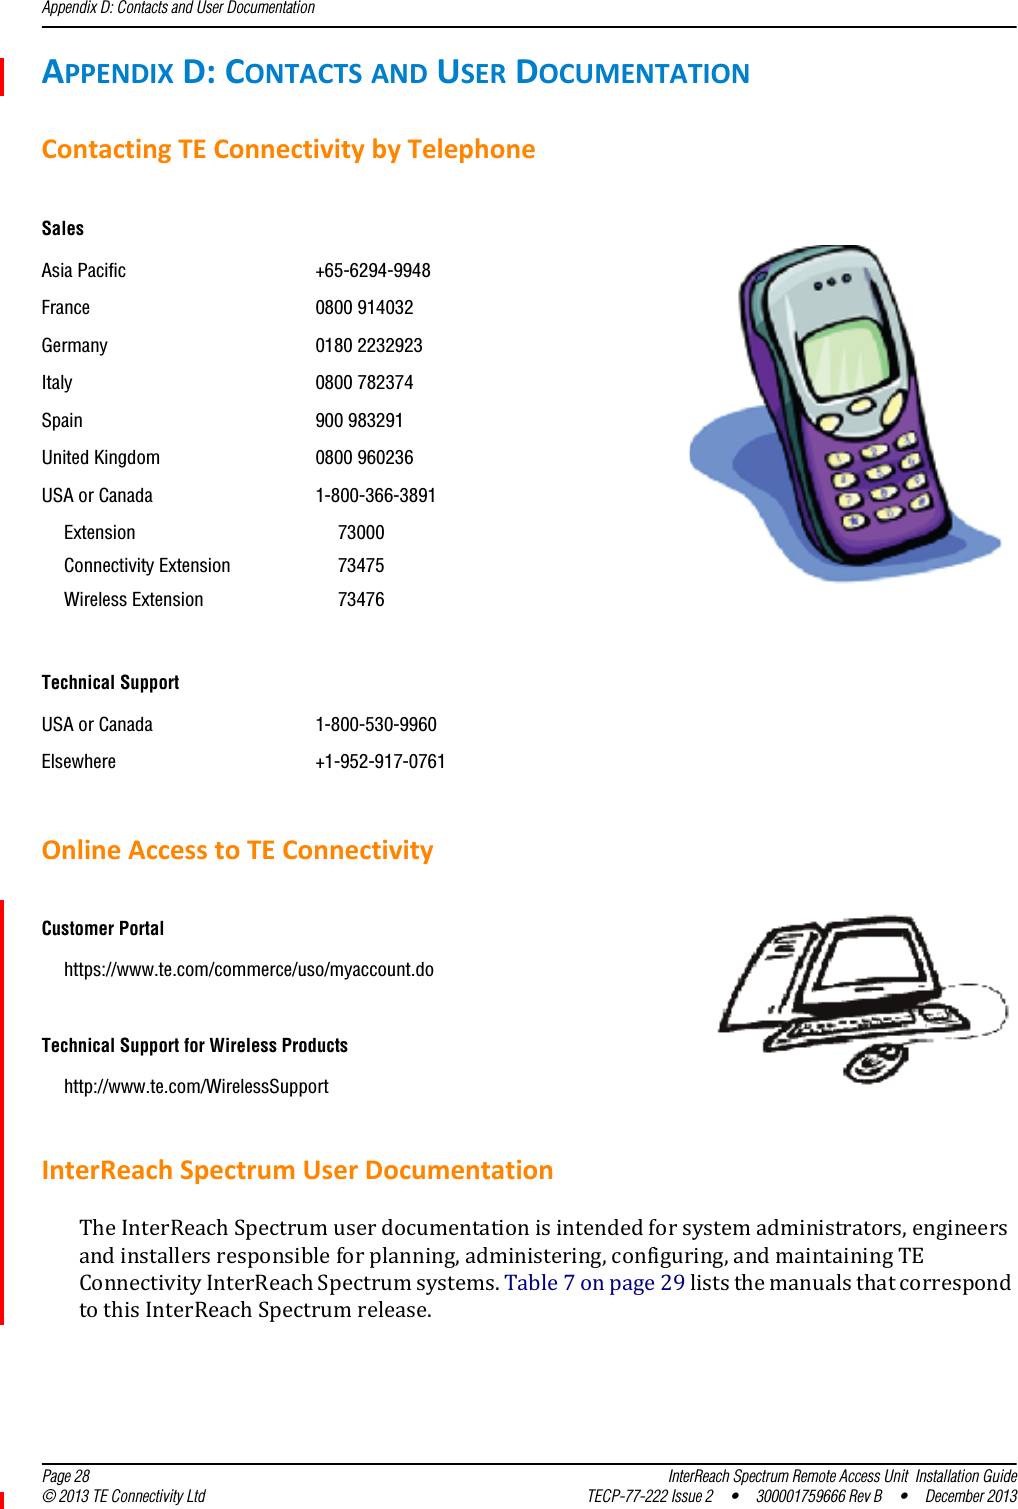 Appendix D: Contacts and User Documentation  Page 28 InterReach Spectrum Remote Access Unit  Installation Guide© 2013 TE Connectivity Ltd TECP-77-222 Issue 2  •  300001759666 Rev B  •  December 2013APPENDIXD:CONTACTSANDUSERDOCUMENTATIONContactingTEConnectivitybyTelephoneOnlineAccesstoTEConnectivityInterReachSpectrumUserDocumentationTheInterReachSpectrumuserdocumentationisintendedforsystemadministrators,engineersandinstallersresponsibleforplanning,administering,configuring,andmaintainingTEConnectivityInterReachSpectrumsystems.Table7onpage29liststhemanualsthatcorrespondtothisInterReachSpectrumrelease.SalesAsia Pacific +65-6294-9948France 0800 914032Germany 0180 2232923Italy 0800 782374Spain 900 983291United Kingdom 0800 960236USA or Canada 1-800-366-3891Extension 73000Connectivity Extension 73475Wireless Extension 73476Technical SupportUSA or Canada 1-800-530-9960Elsewhere +1-952-917-0761Customer Portalhttps://www.te.com/commerce/uso/myaccount.doTechnical Support for Wireless Productshttp://www.te.com/WirelessSupport 